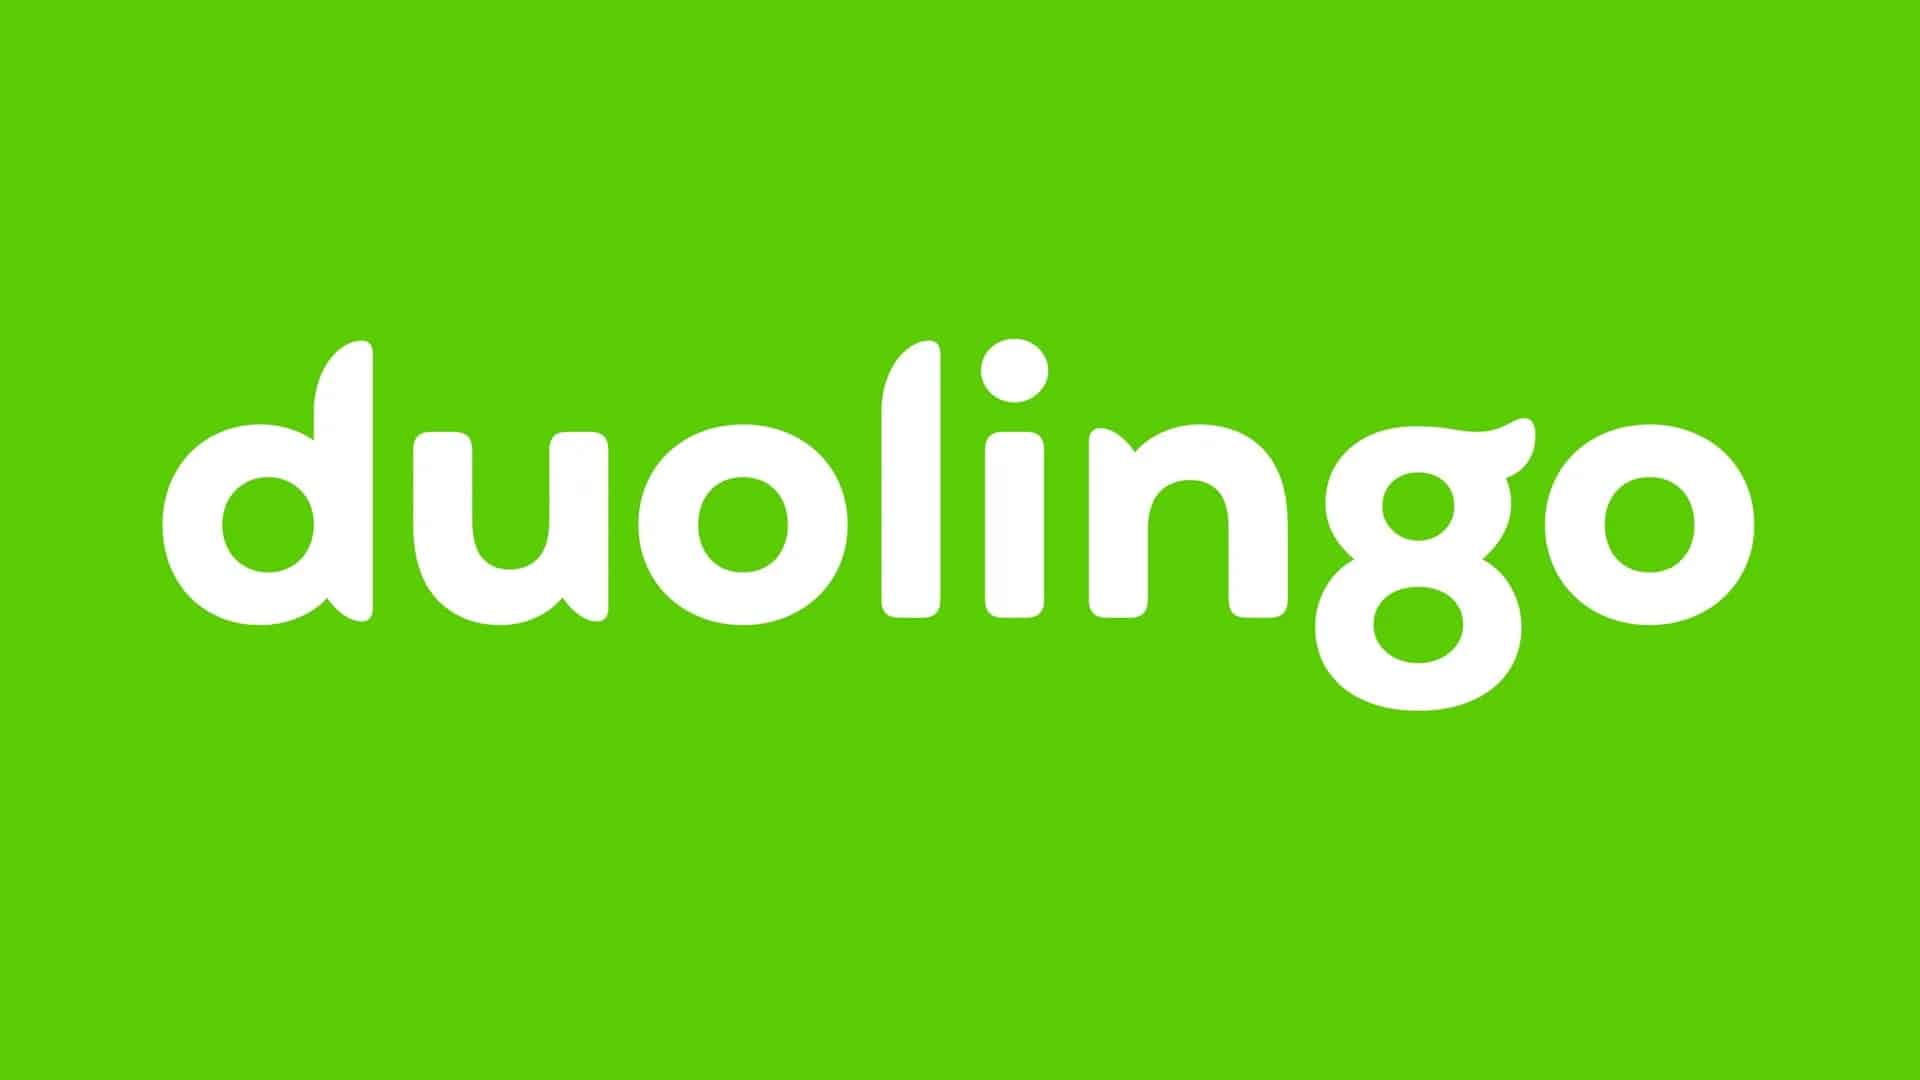 Duolingo is one of the best free apps and games for iPhone